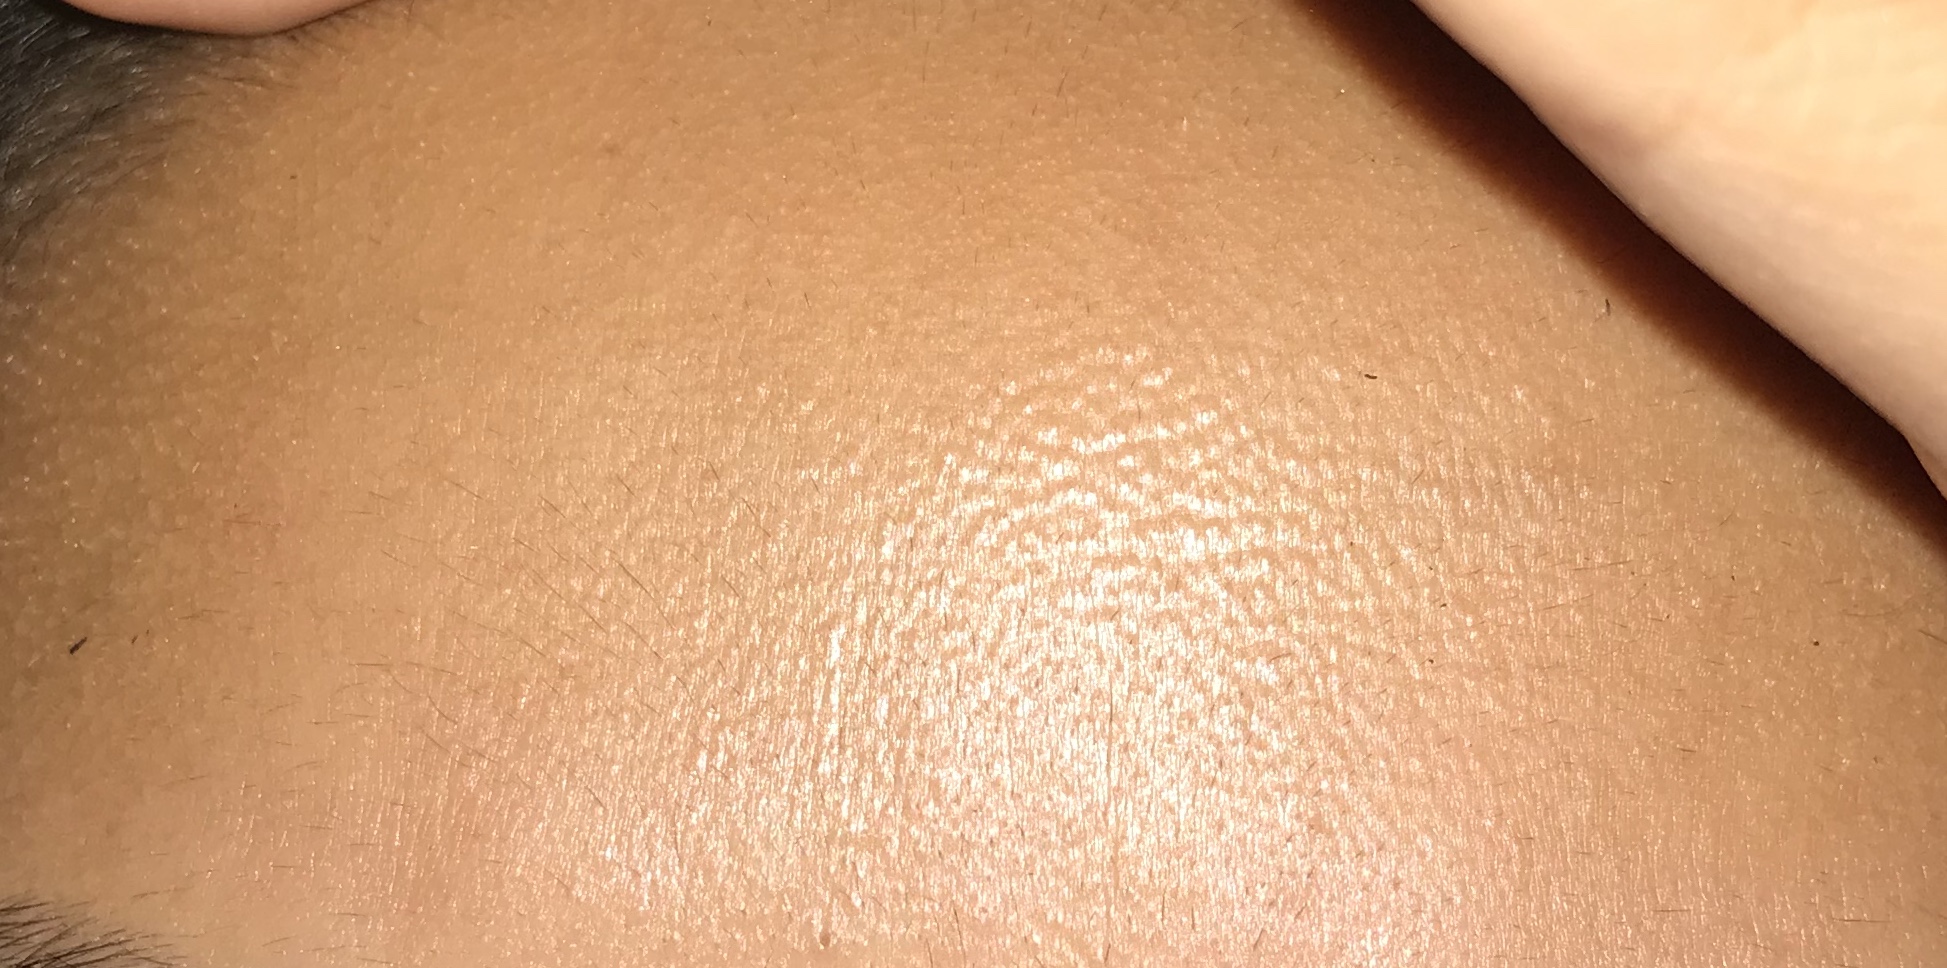 Tiny Flesh Colored Bumps On Forehead General Acne Discussion Acne